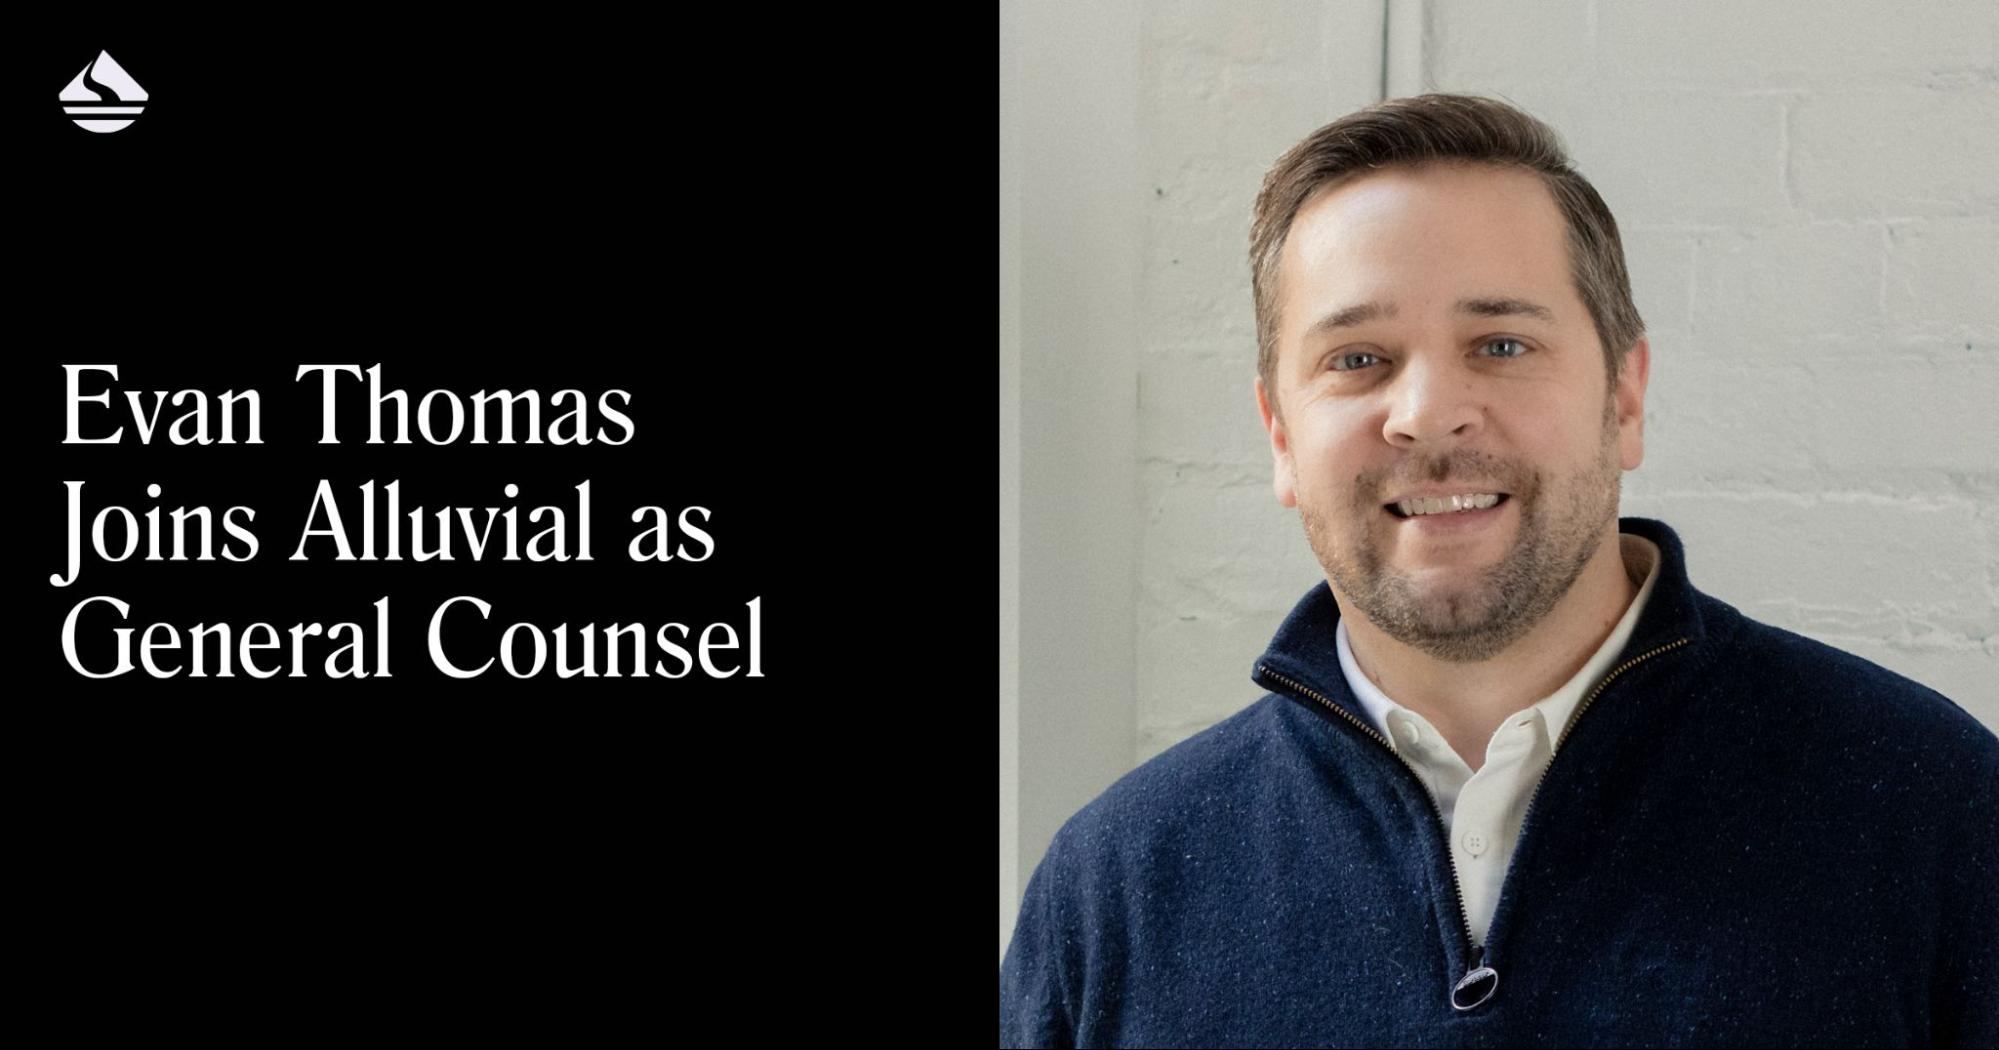 Evan Thomas Joins Alluvial as General Counsel